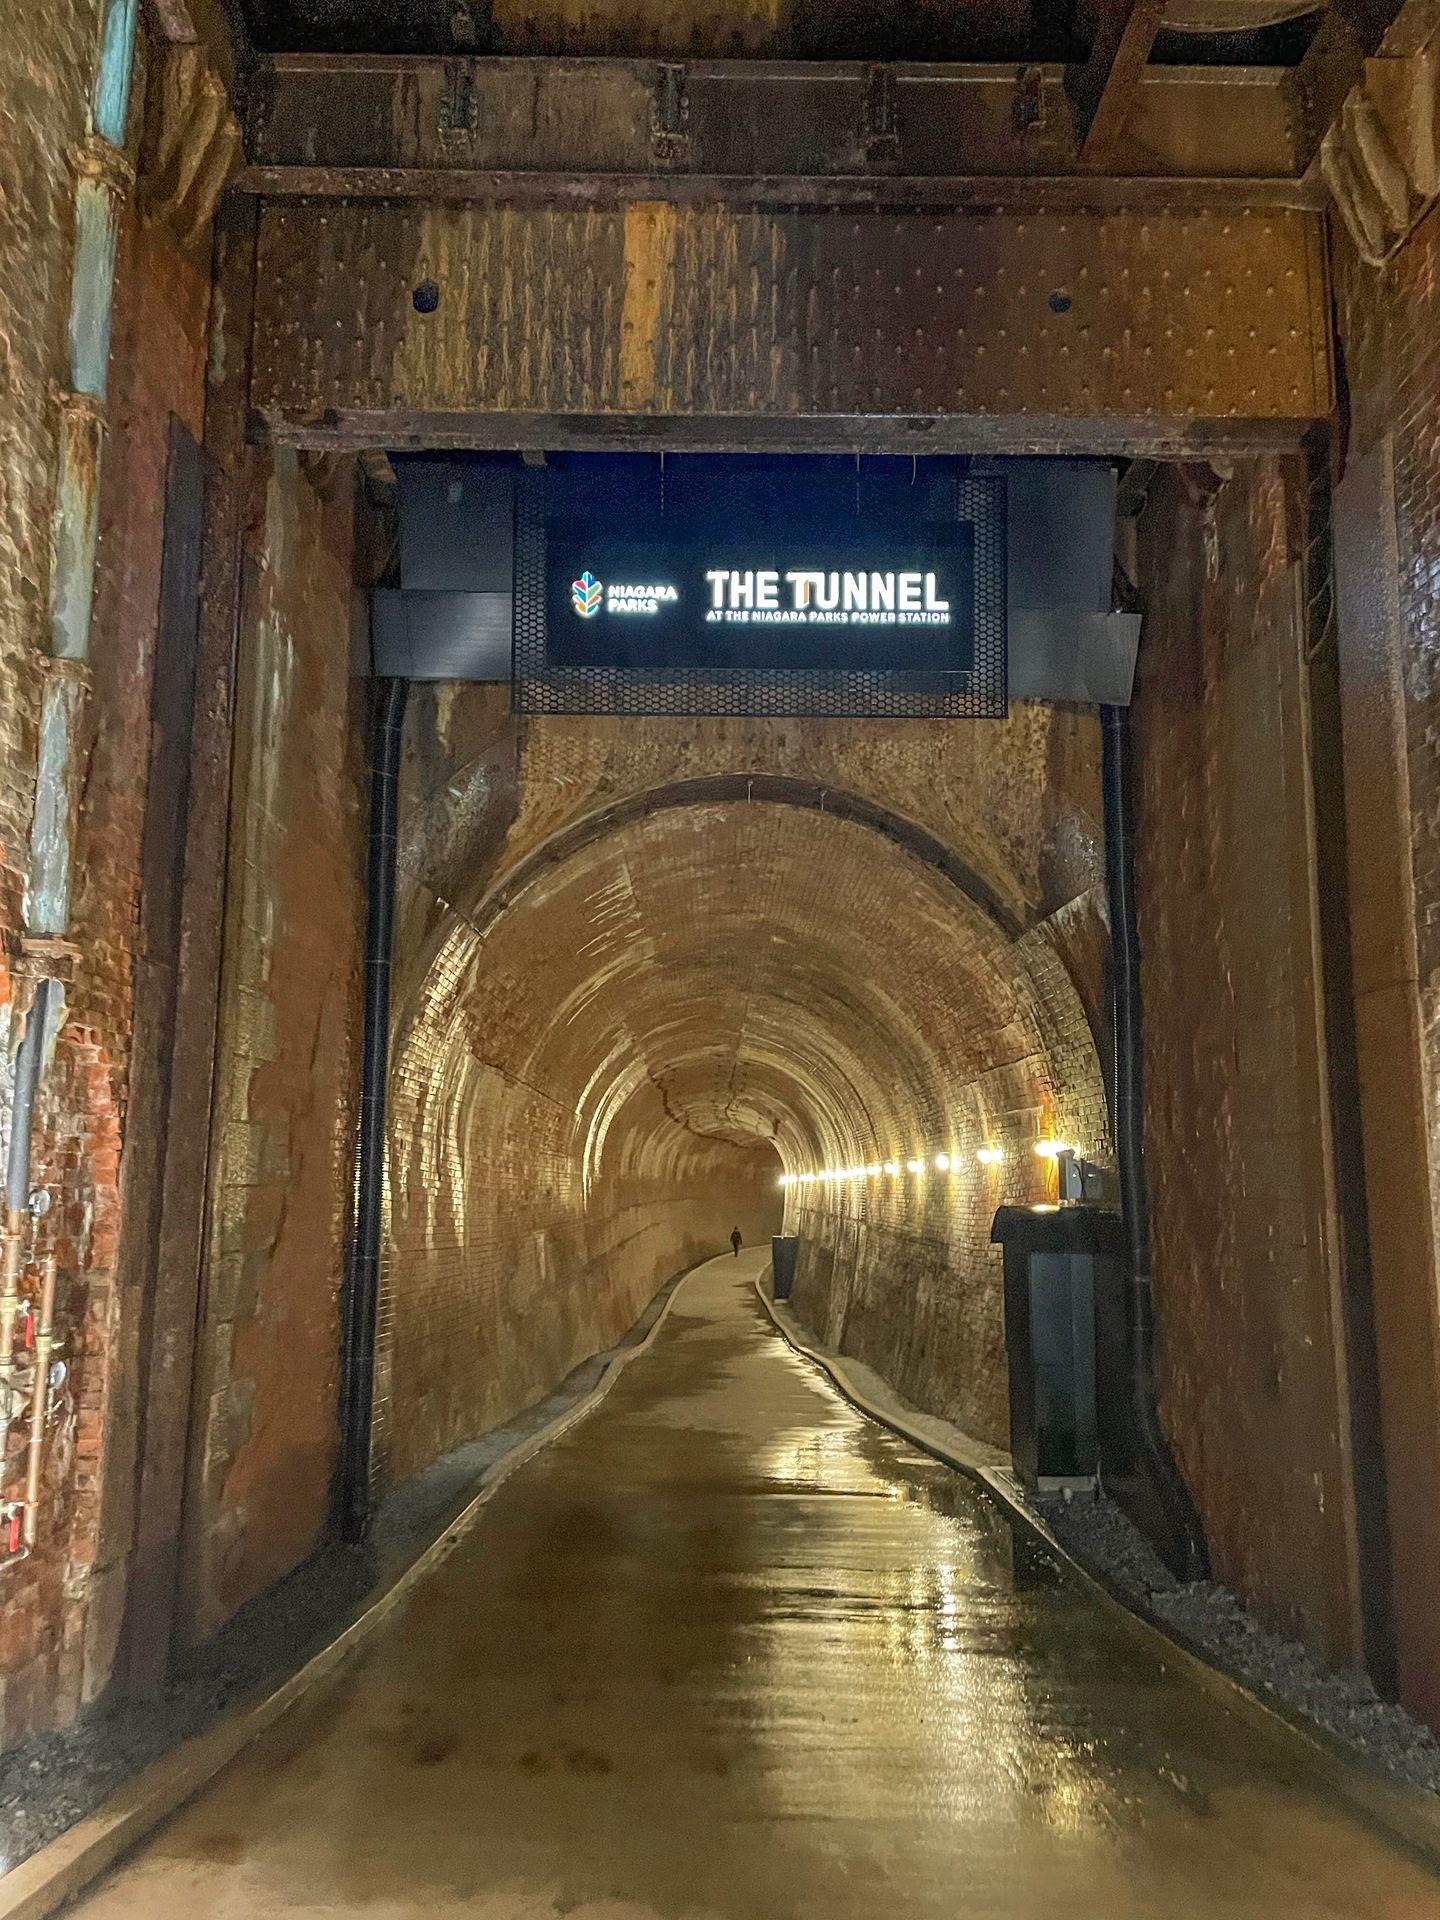 A view of the start of the tunnel that you can walk through for a view of the falls.